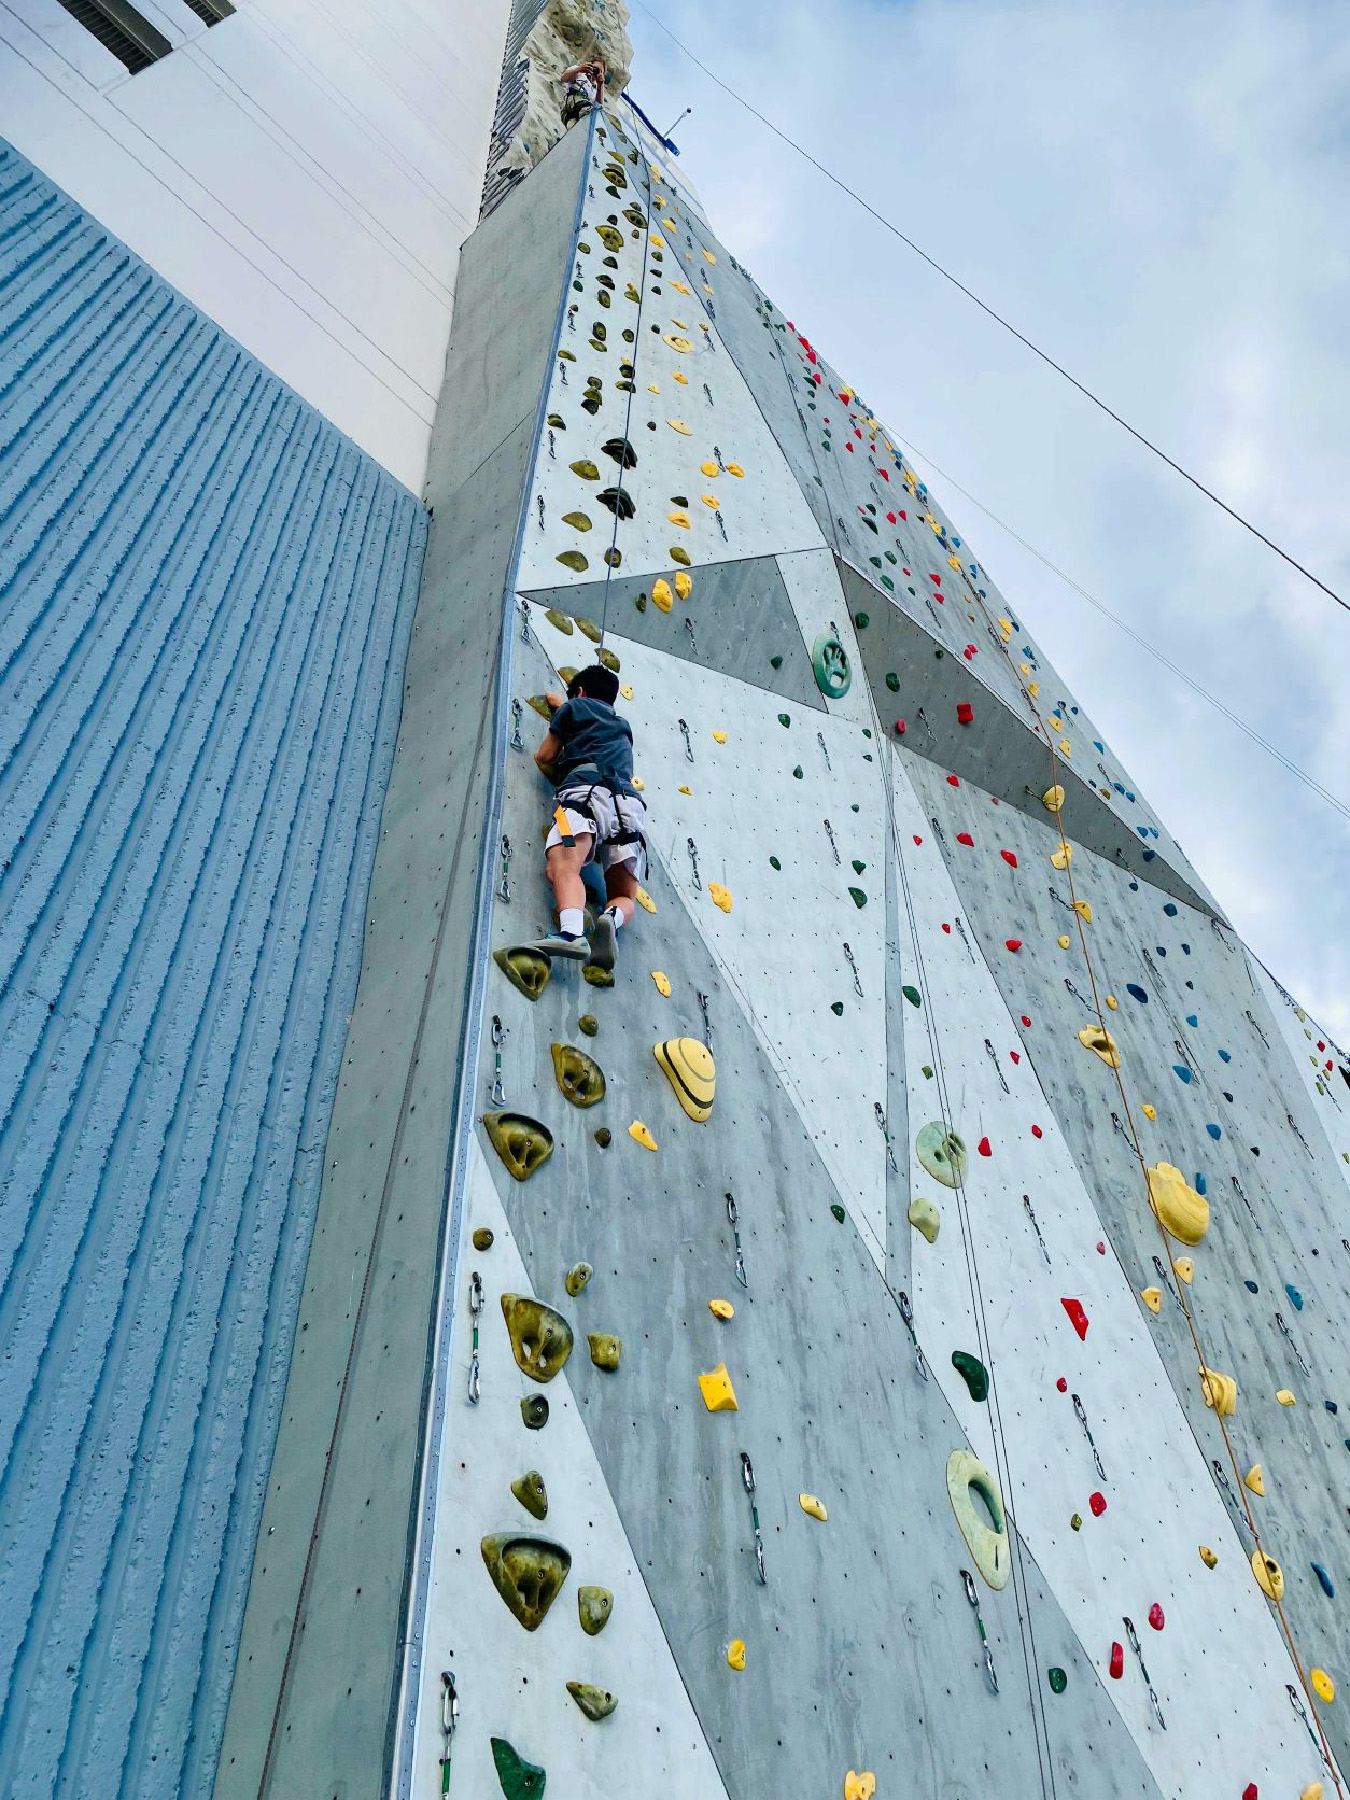 A climber tries his luck over downtown Reno, Nevada.